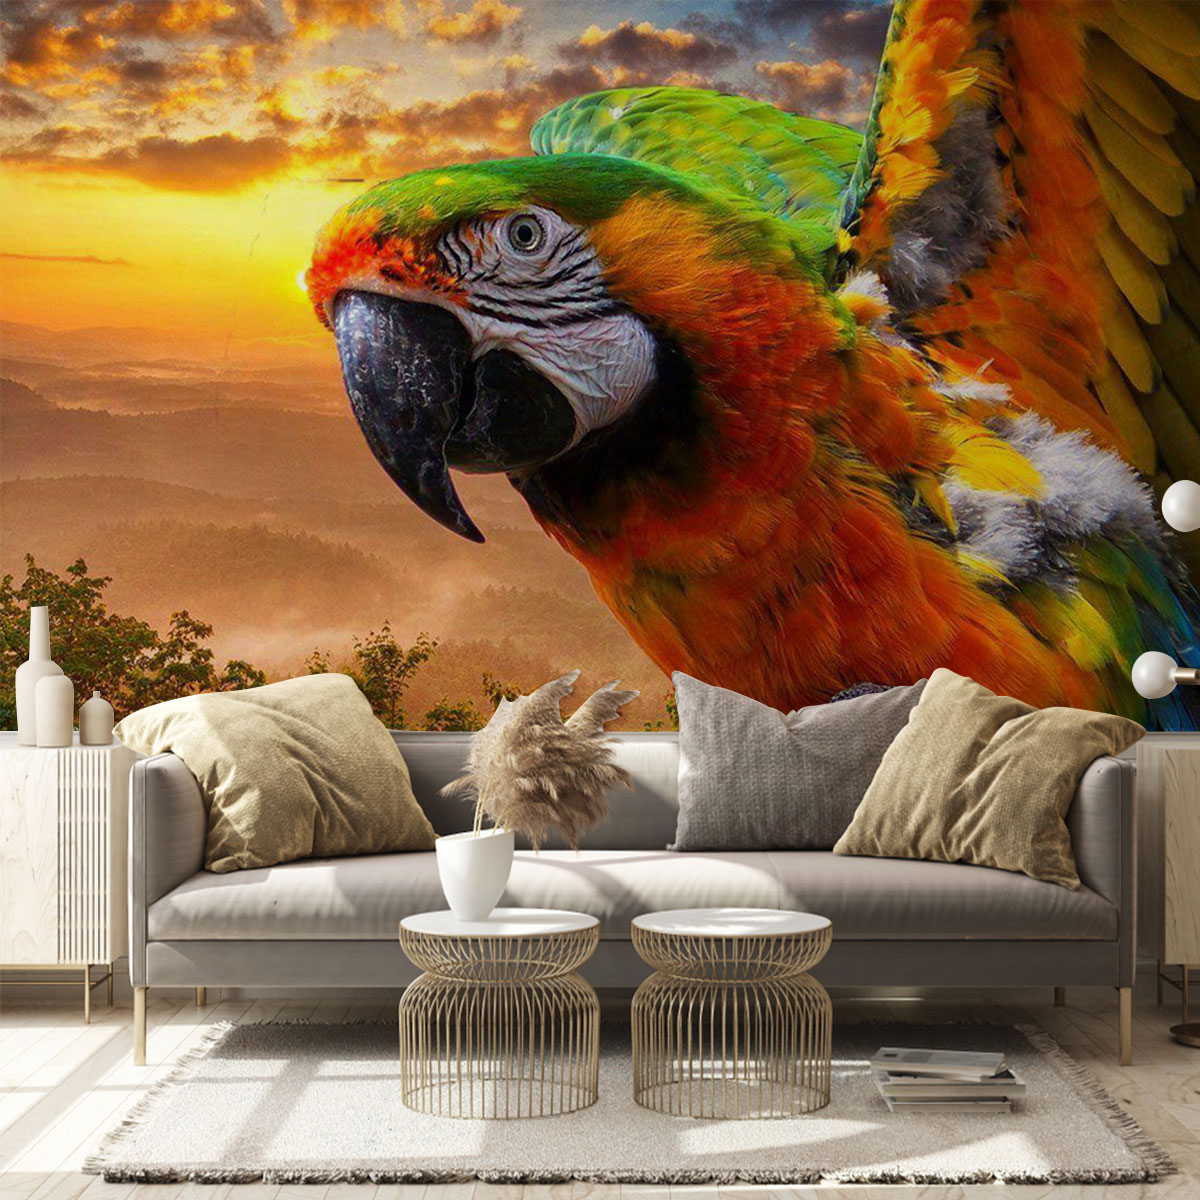 Parrot Under The Sunset Wall Mural